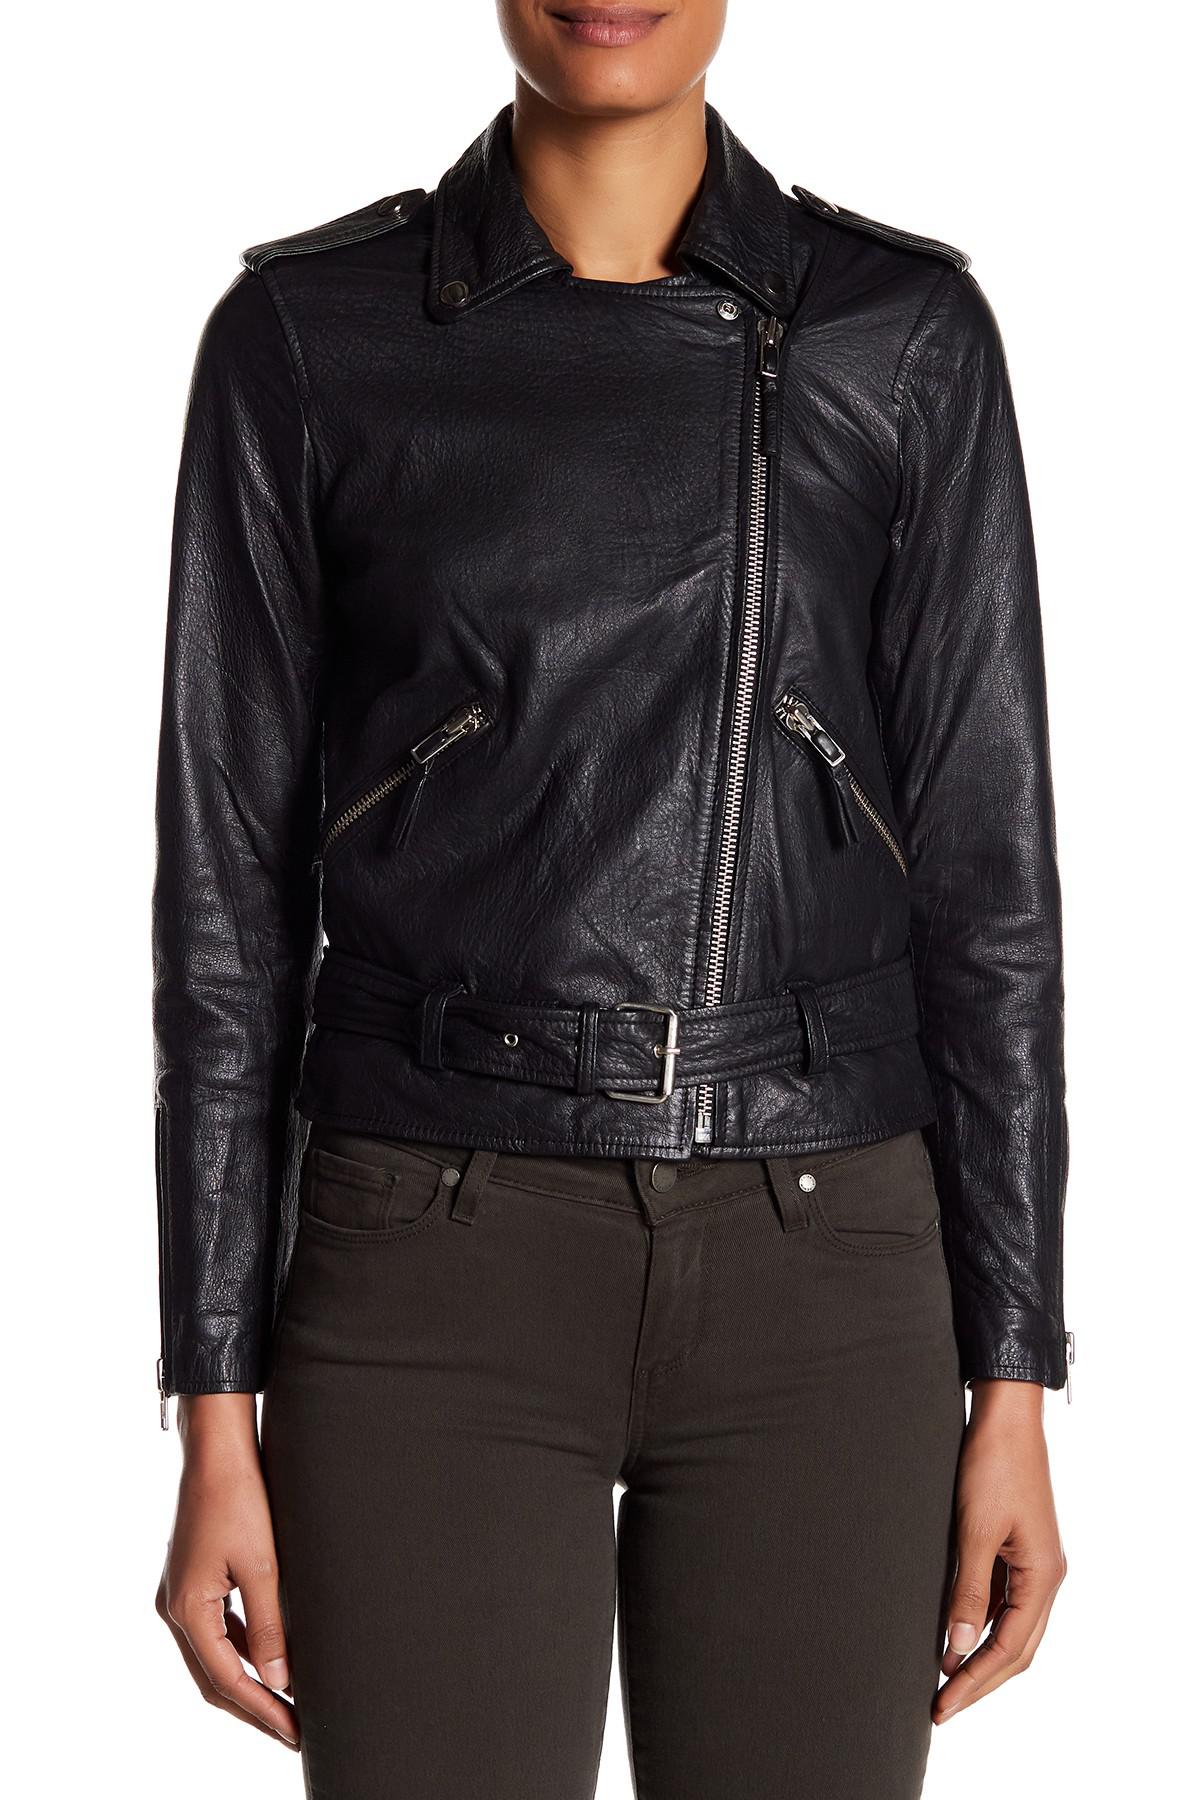 Lyst - Doma Leather Moto Jacket With Belt in Black